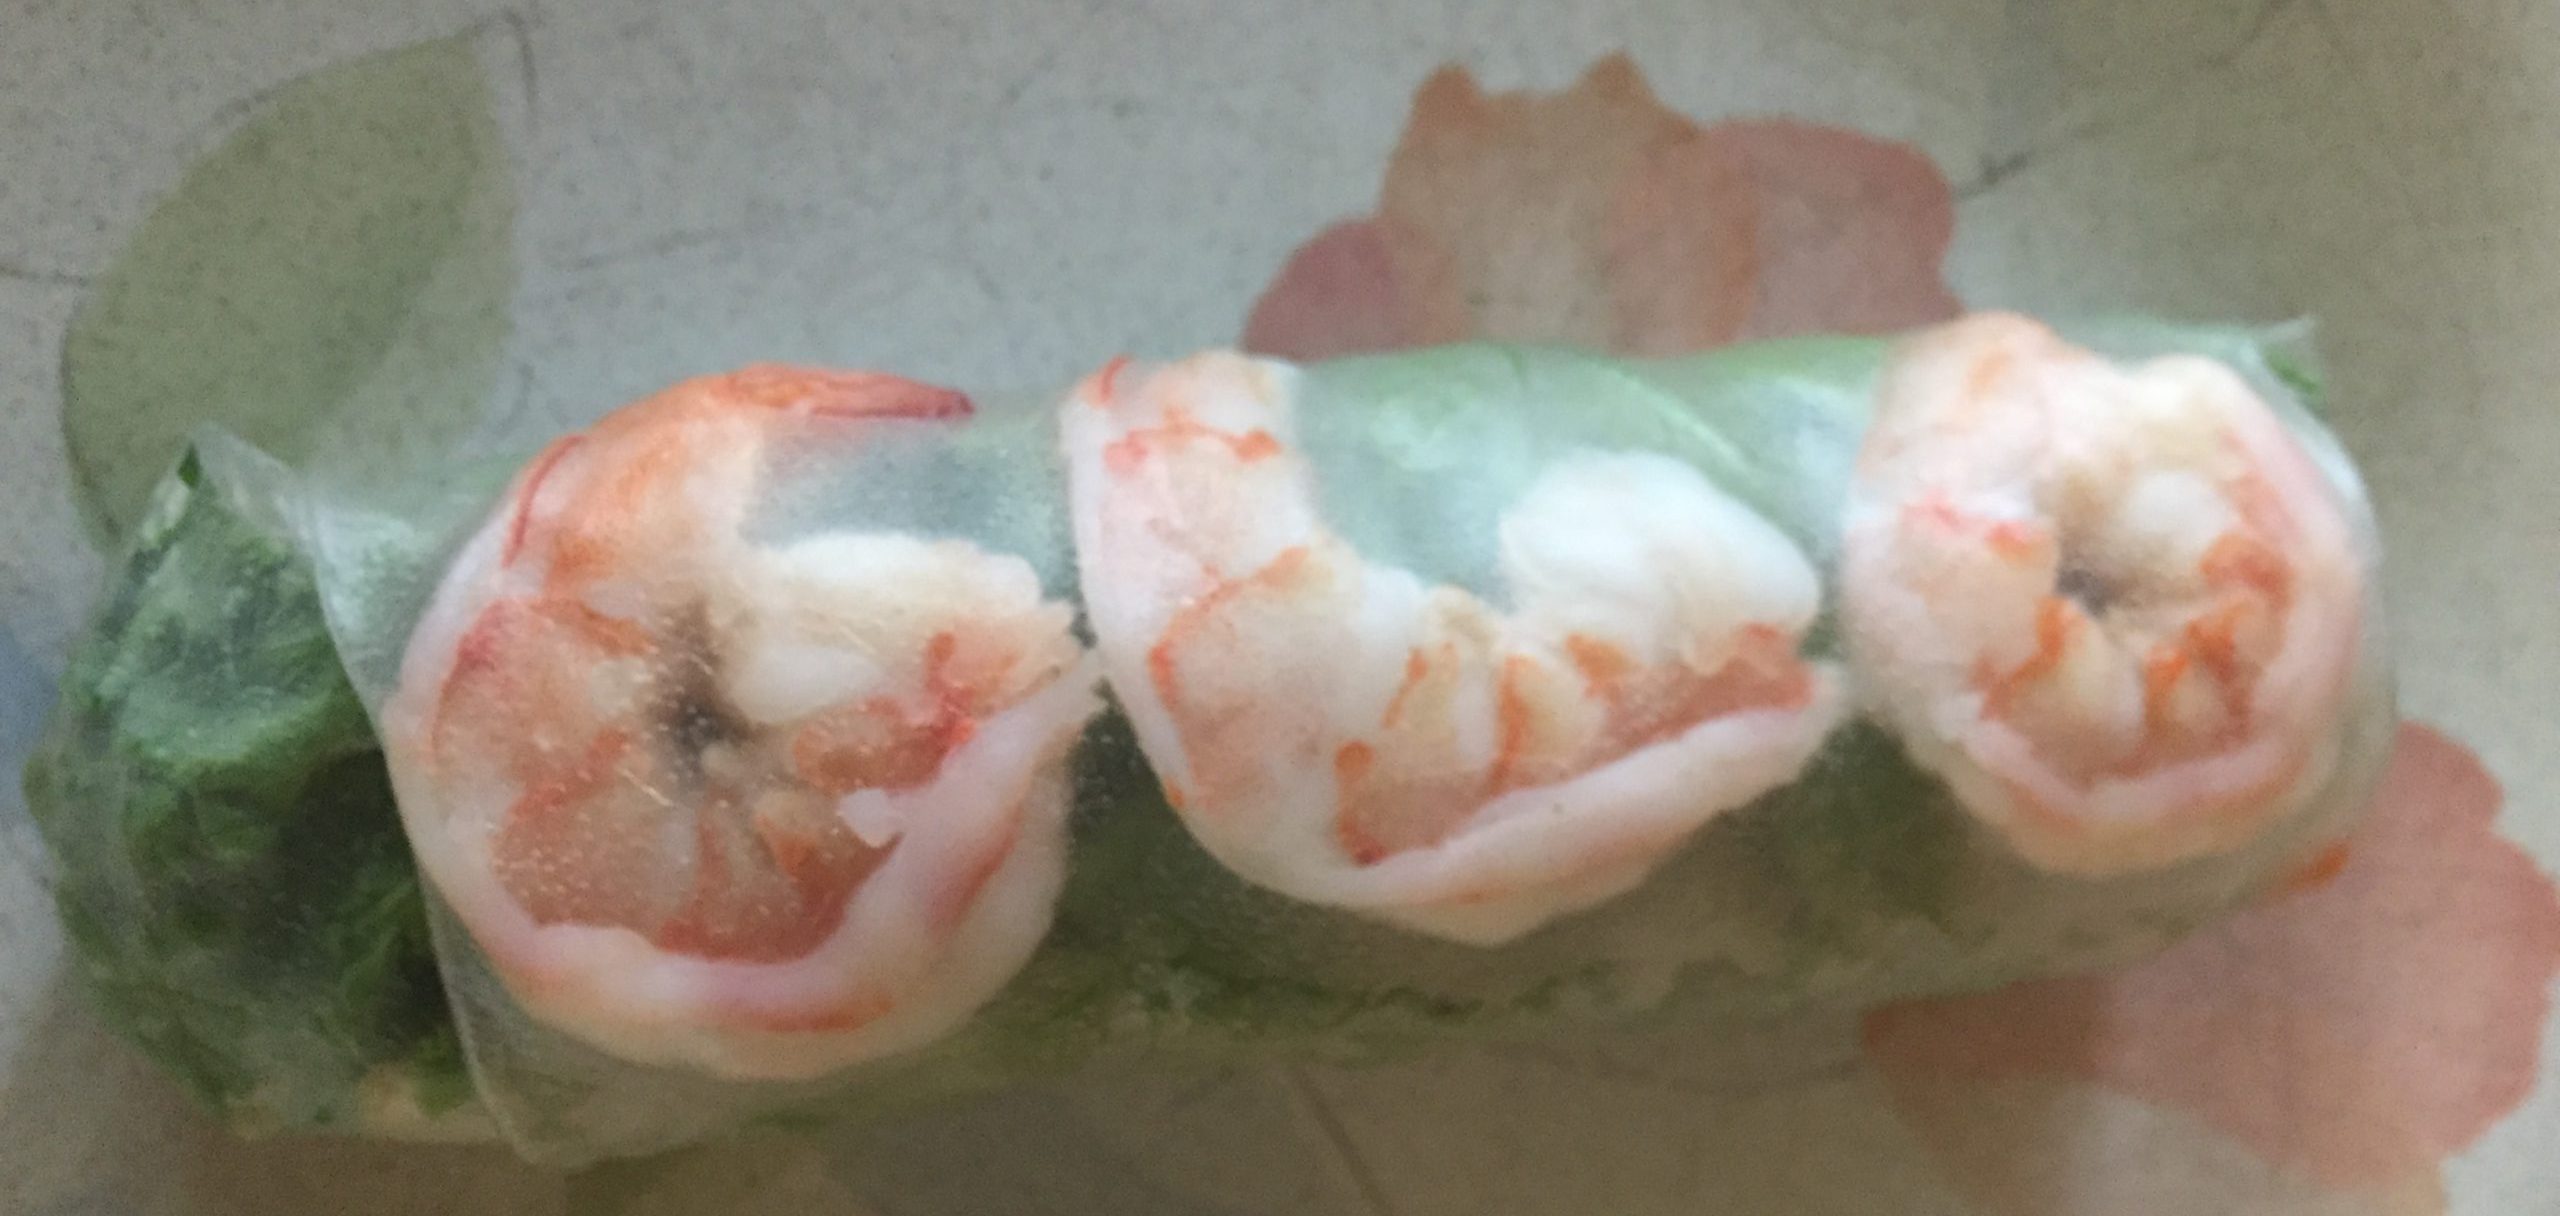 Rolled Vietnamese Spring Roll with feature ingredient showing.